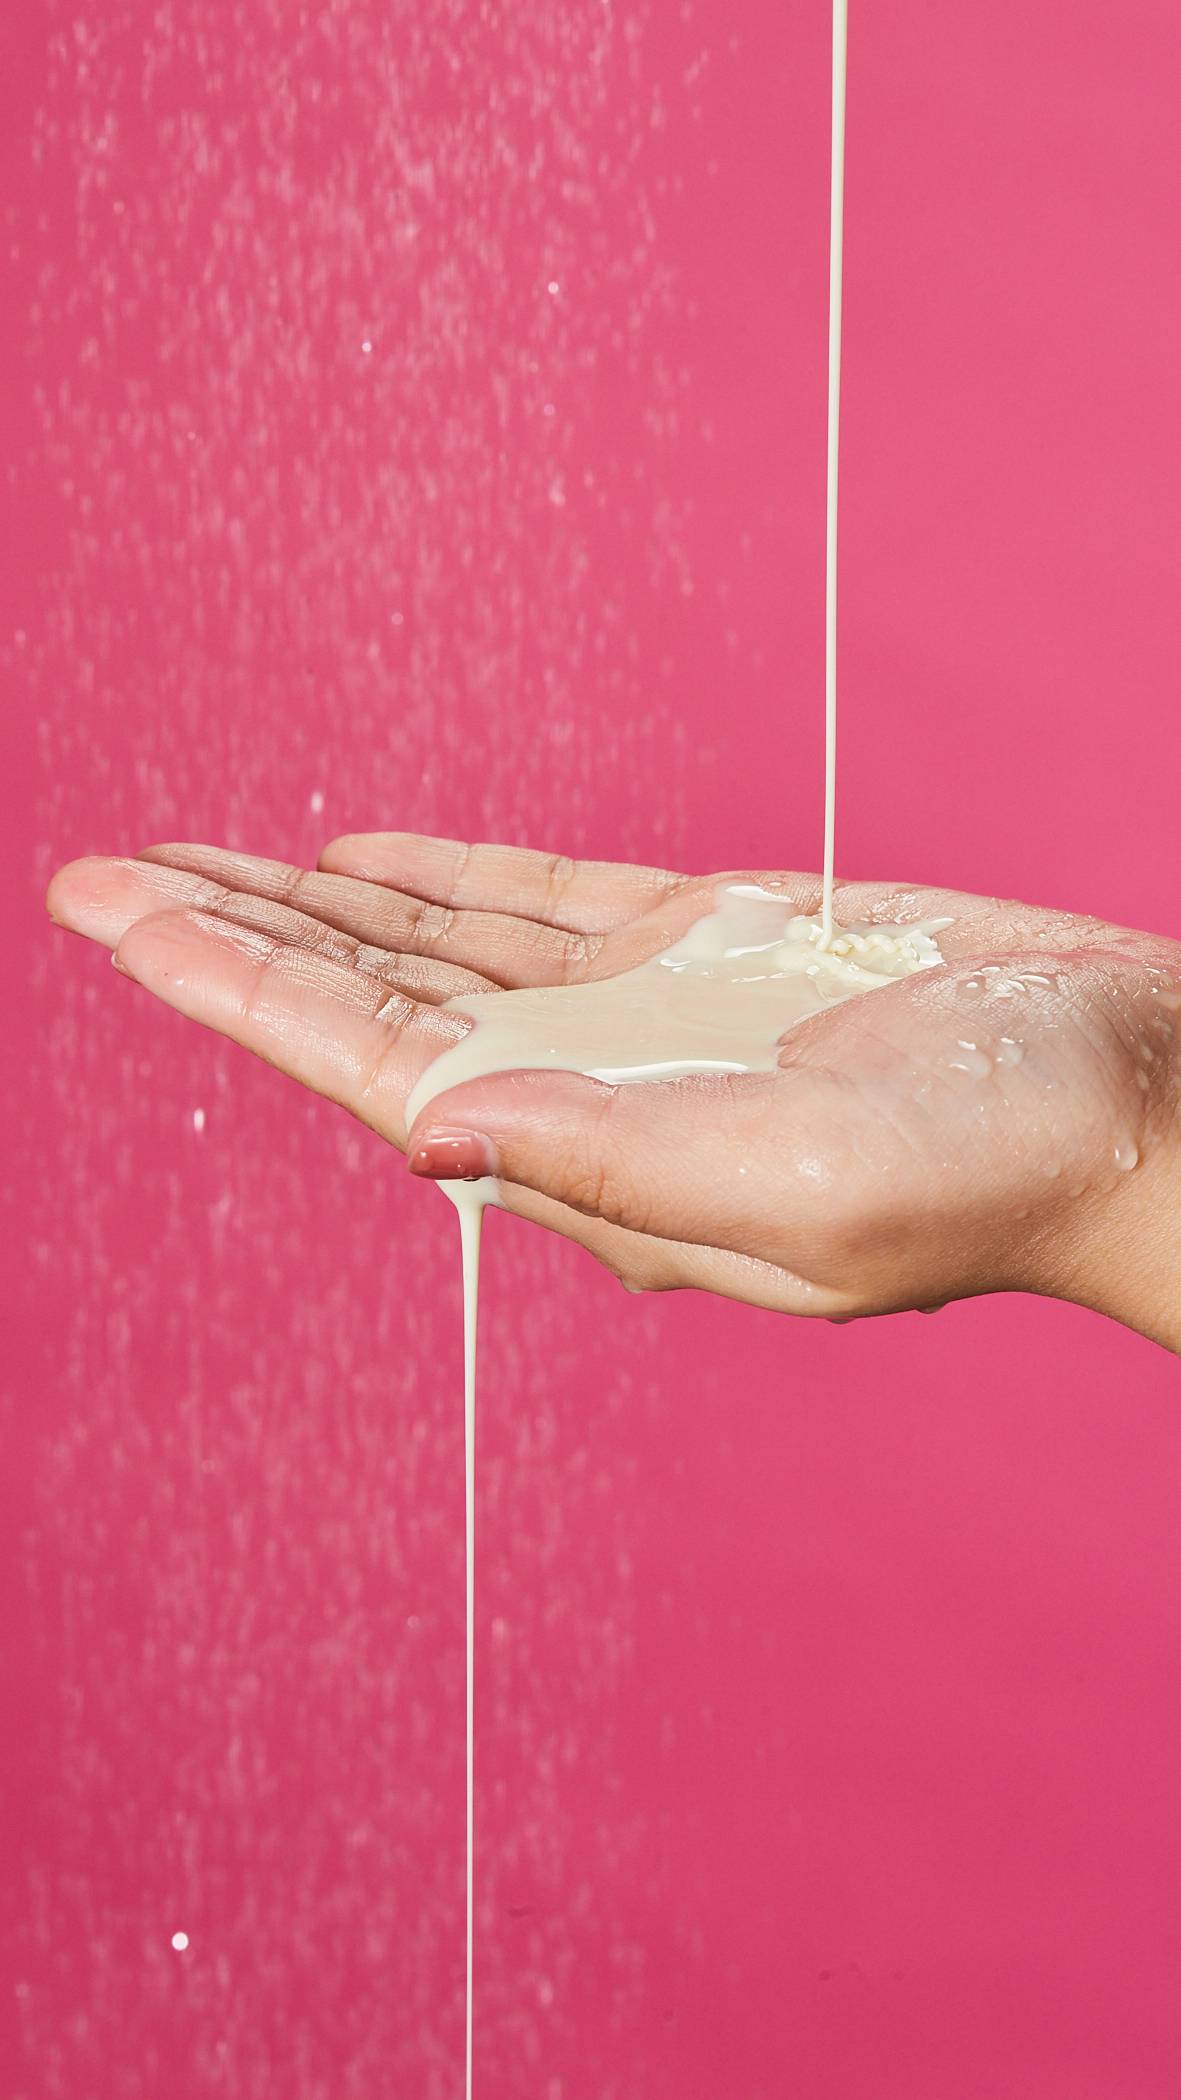 A close-up of the model's hand which is being filled with a generous amount of the Sakura shower gel from above and is overflowing on a deep pink background. 